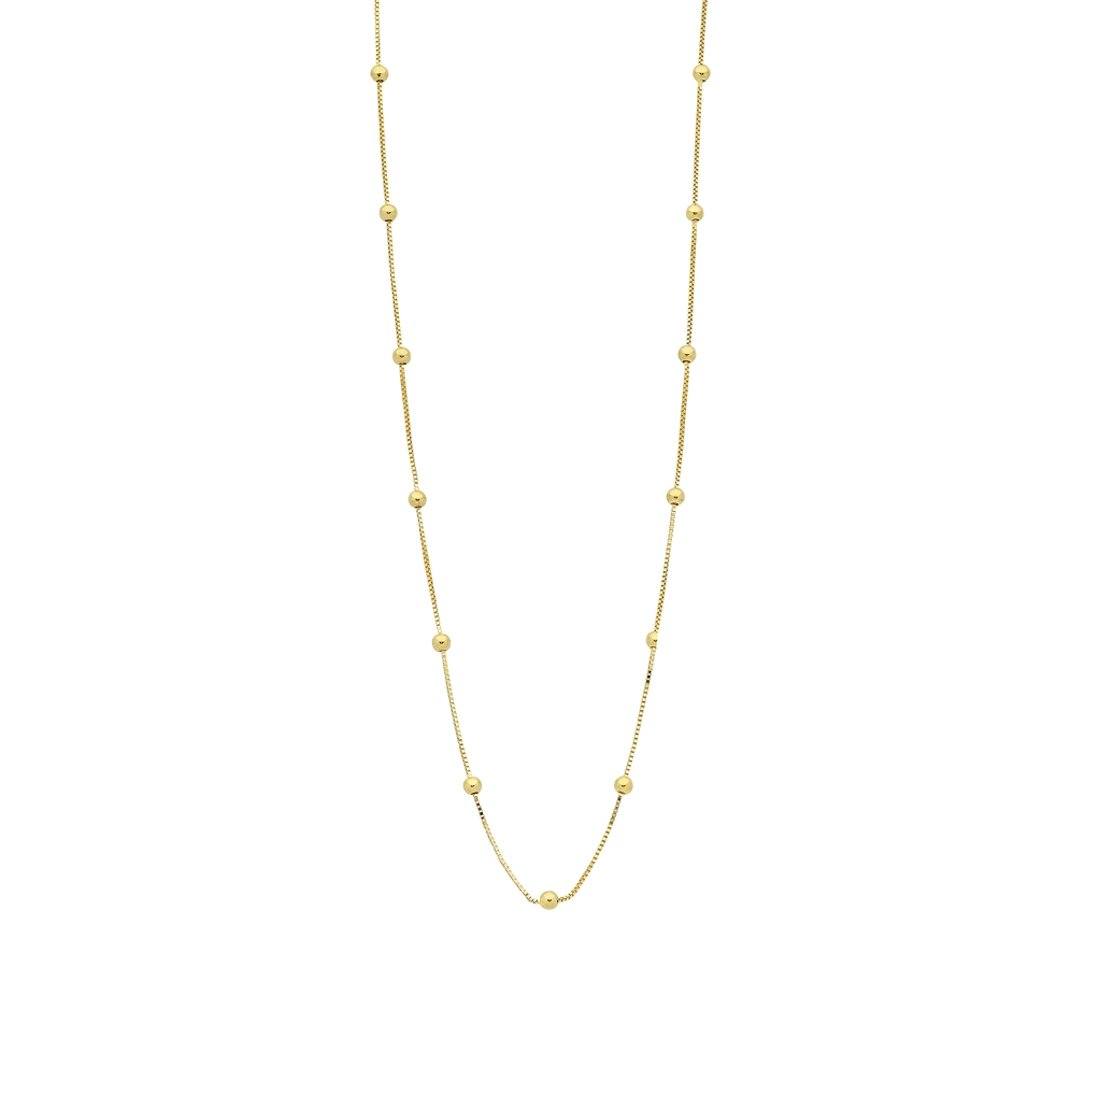 9ct Yellow Gold Silver Infused Chain And Ball Necklace 45cm Necklaces Bevilles 